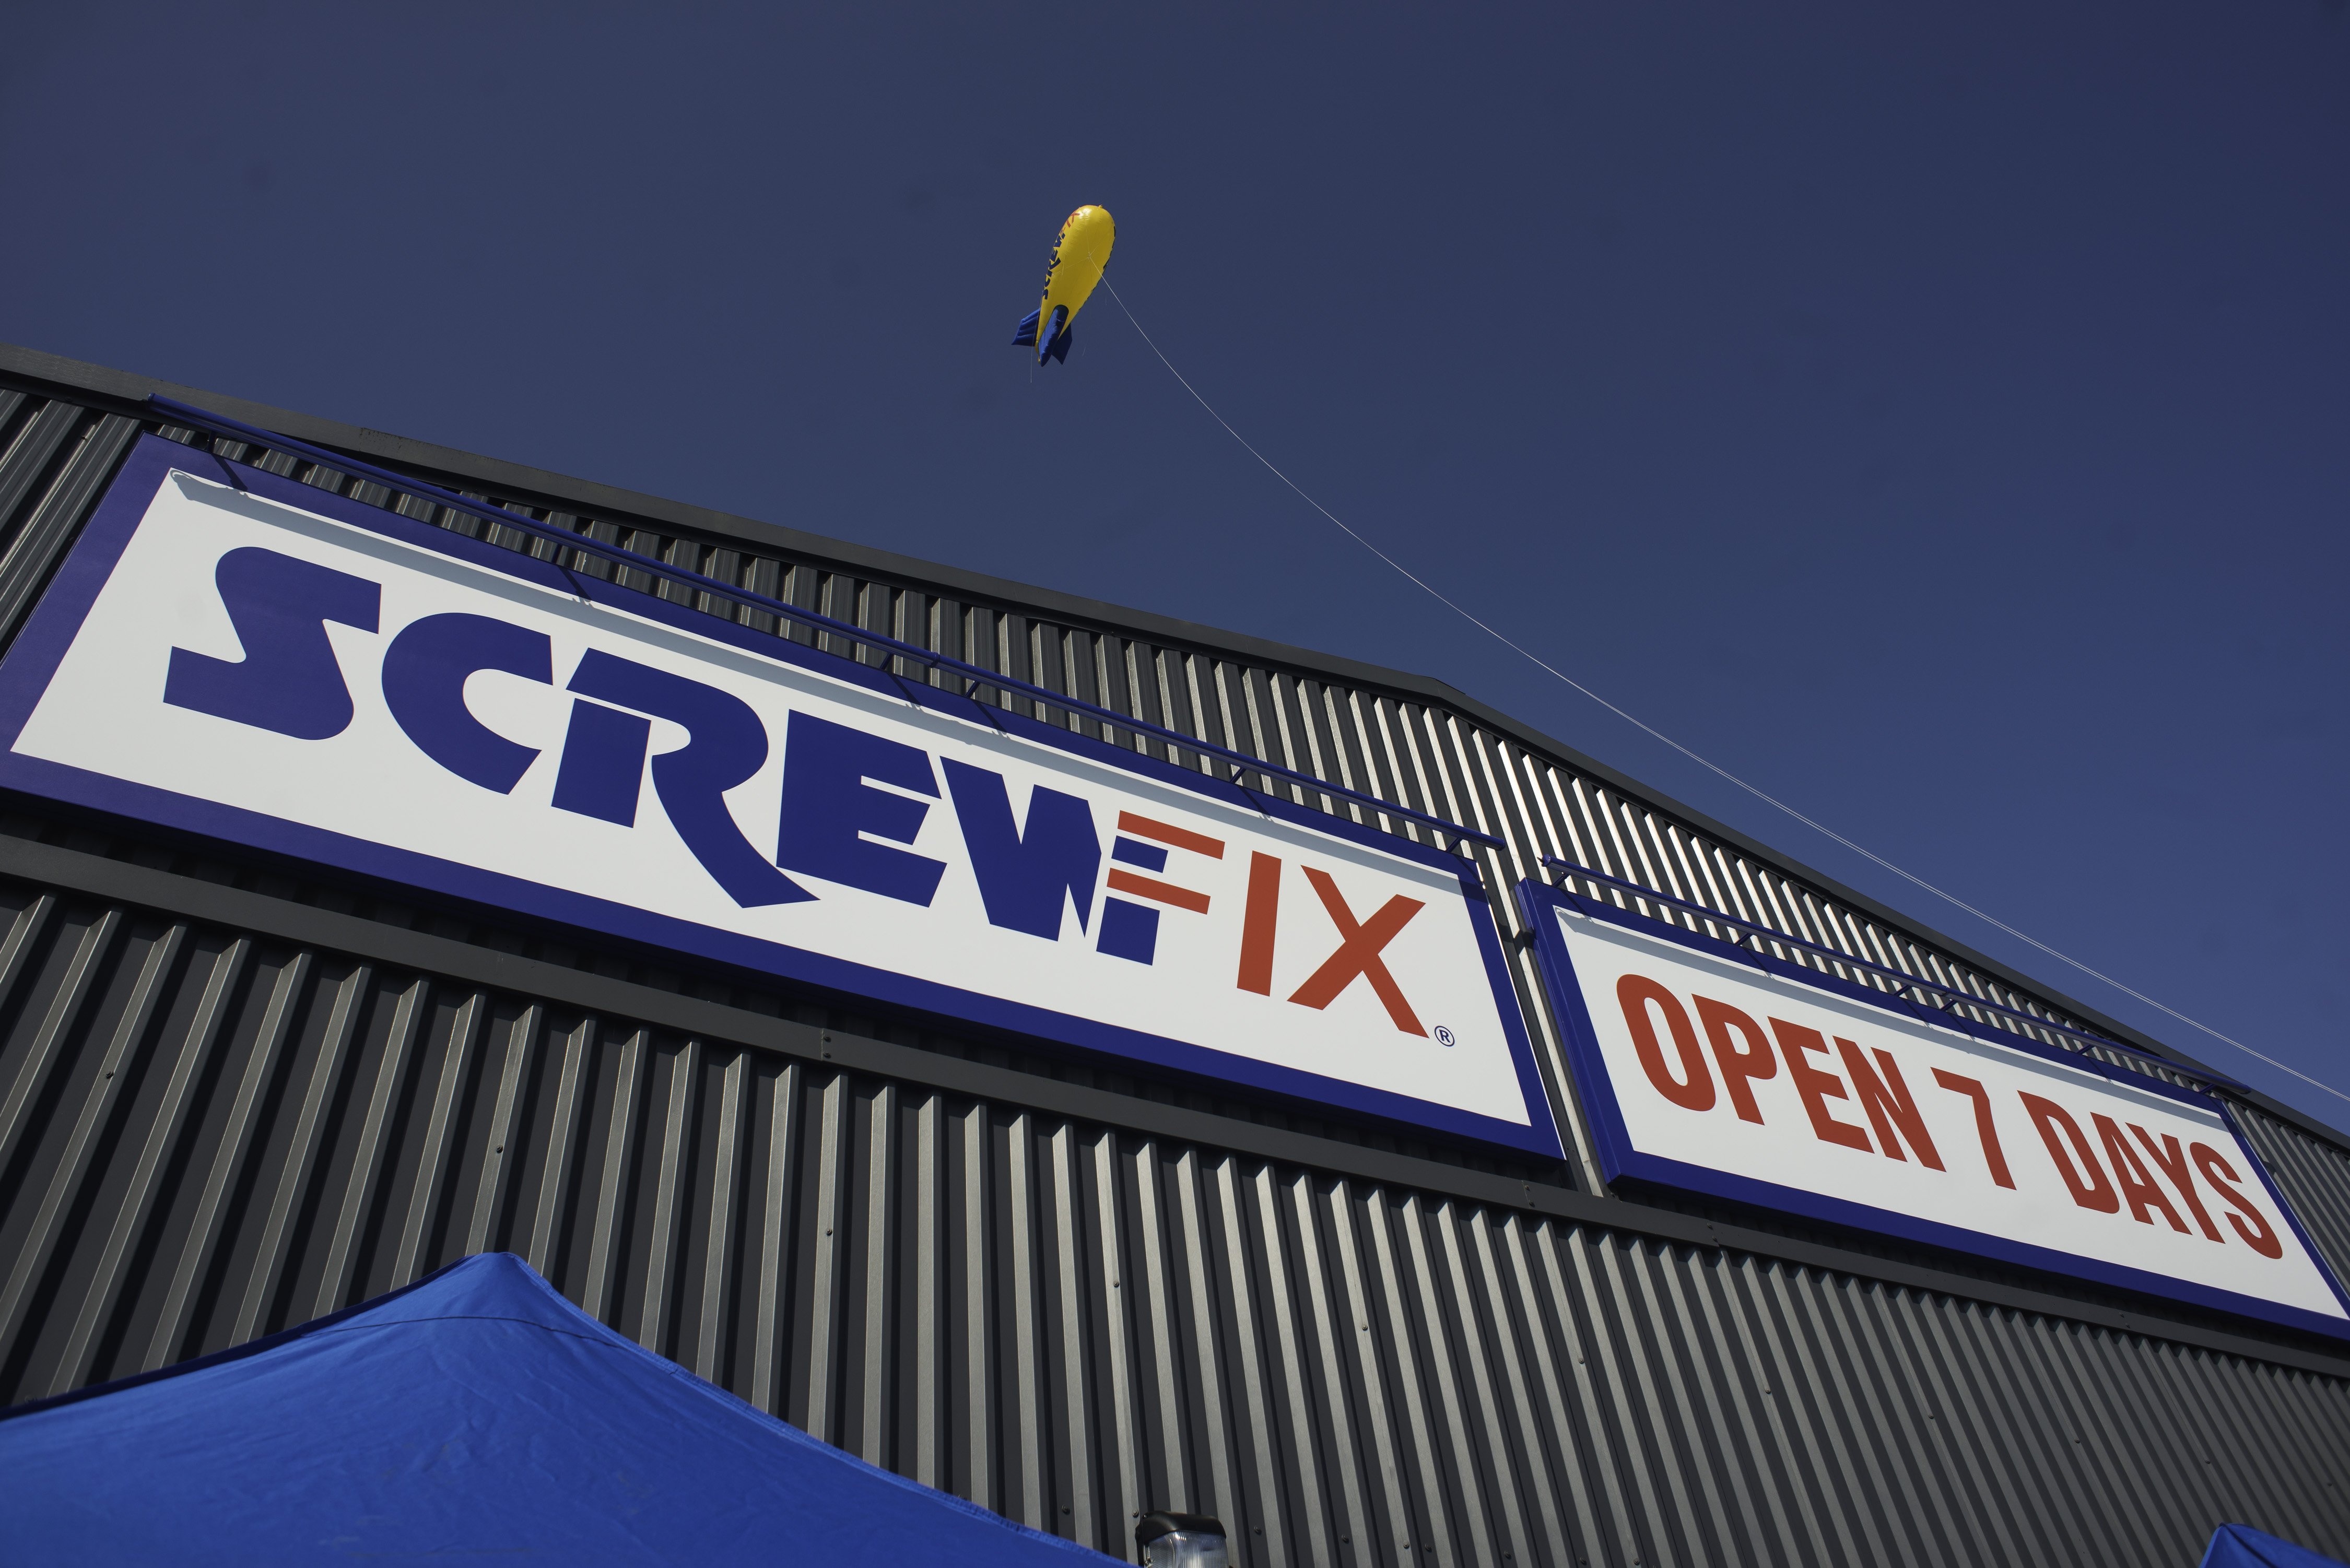 Ipswich’s second Screwfix store to open on 8th October